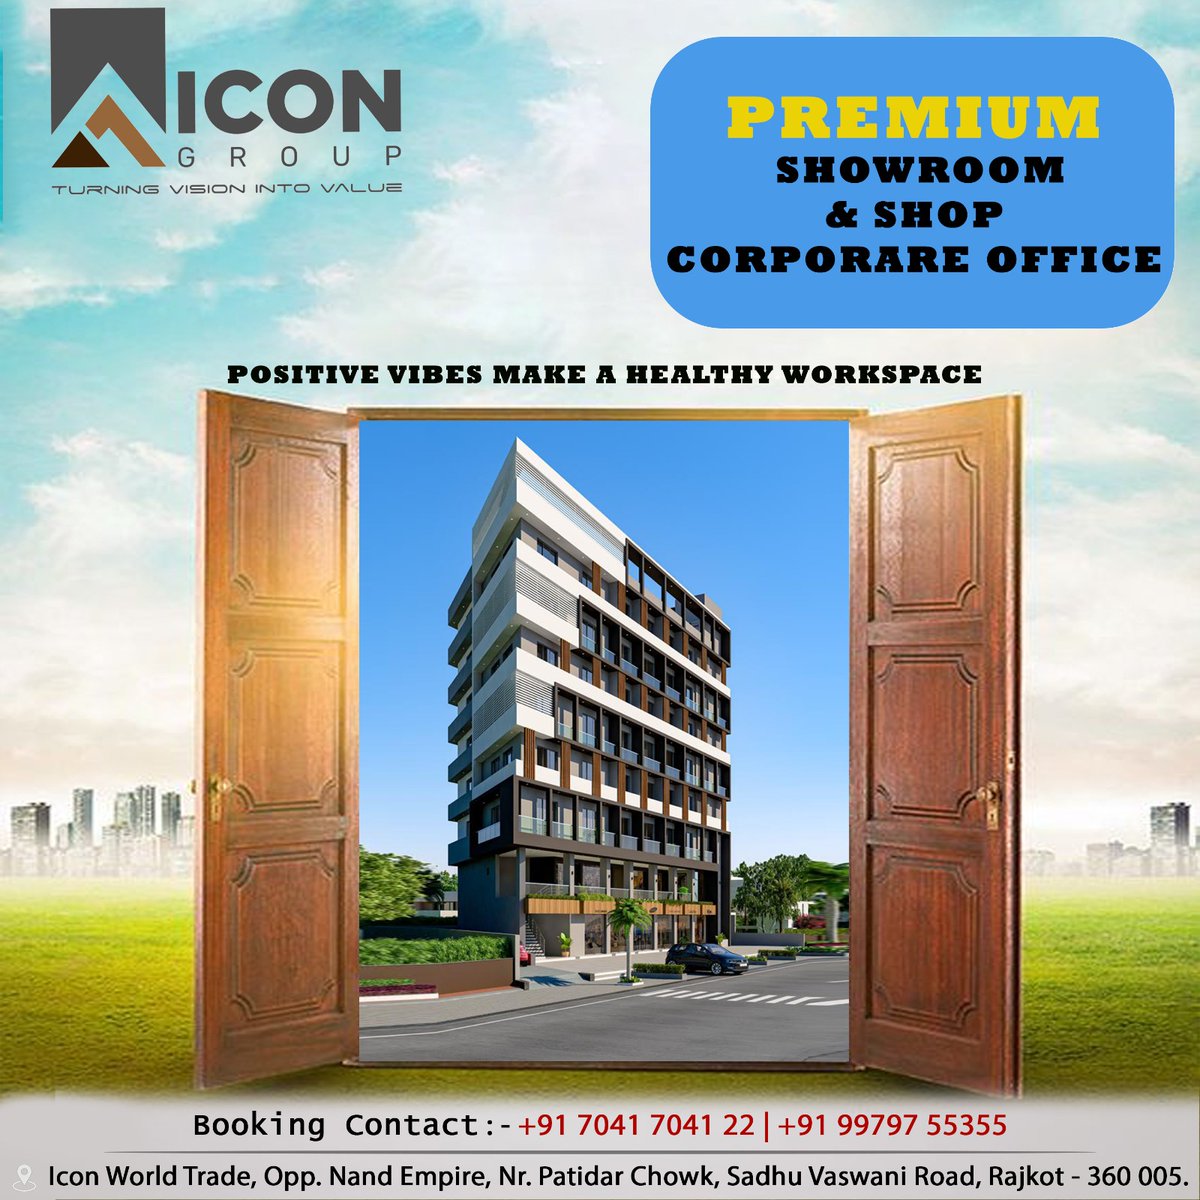 Icon Group give your Dream Office.
contact for booking : 70417 04122
.
.
#iconworldtrade #icontrade #bestbulding #business #businessplace #shoppingcomplex #showroom #buldingdesign #corporateoffice #archiveoffice #officespace #Offices #officeplace #bestlocation #dreamoffice